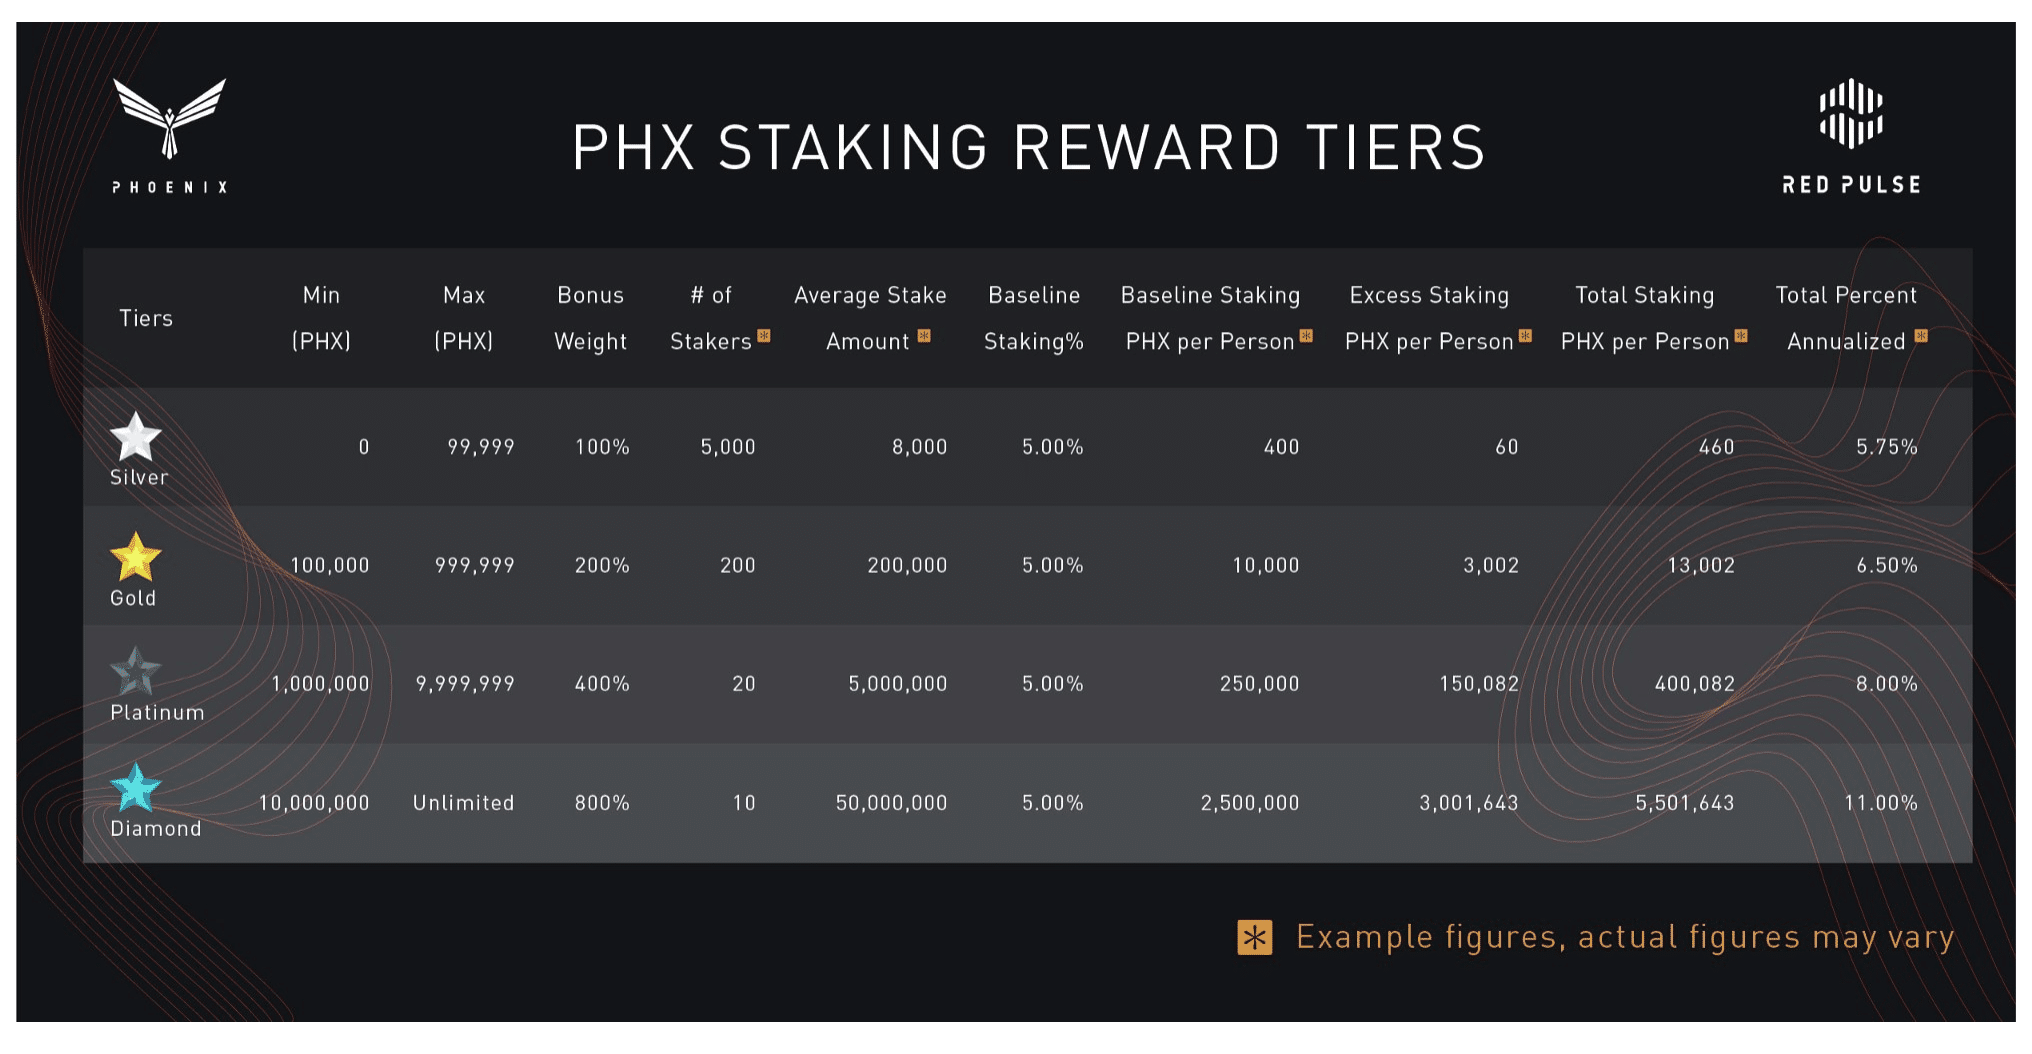 Red Pulse staking rewards